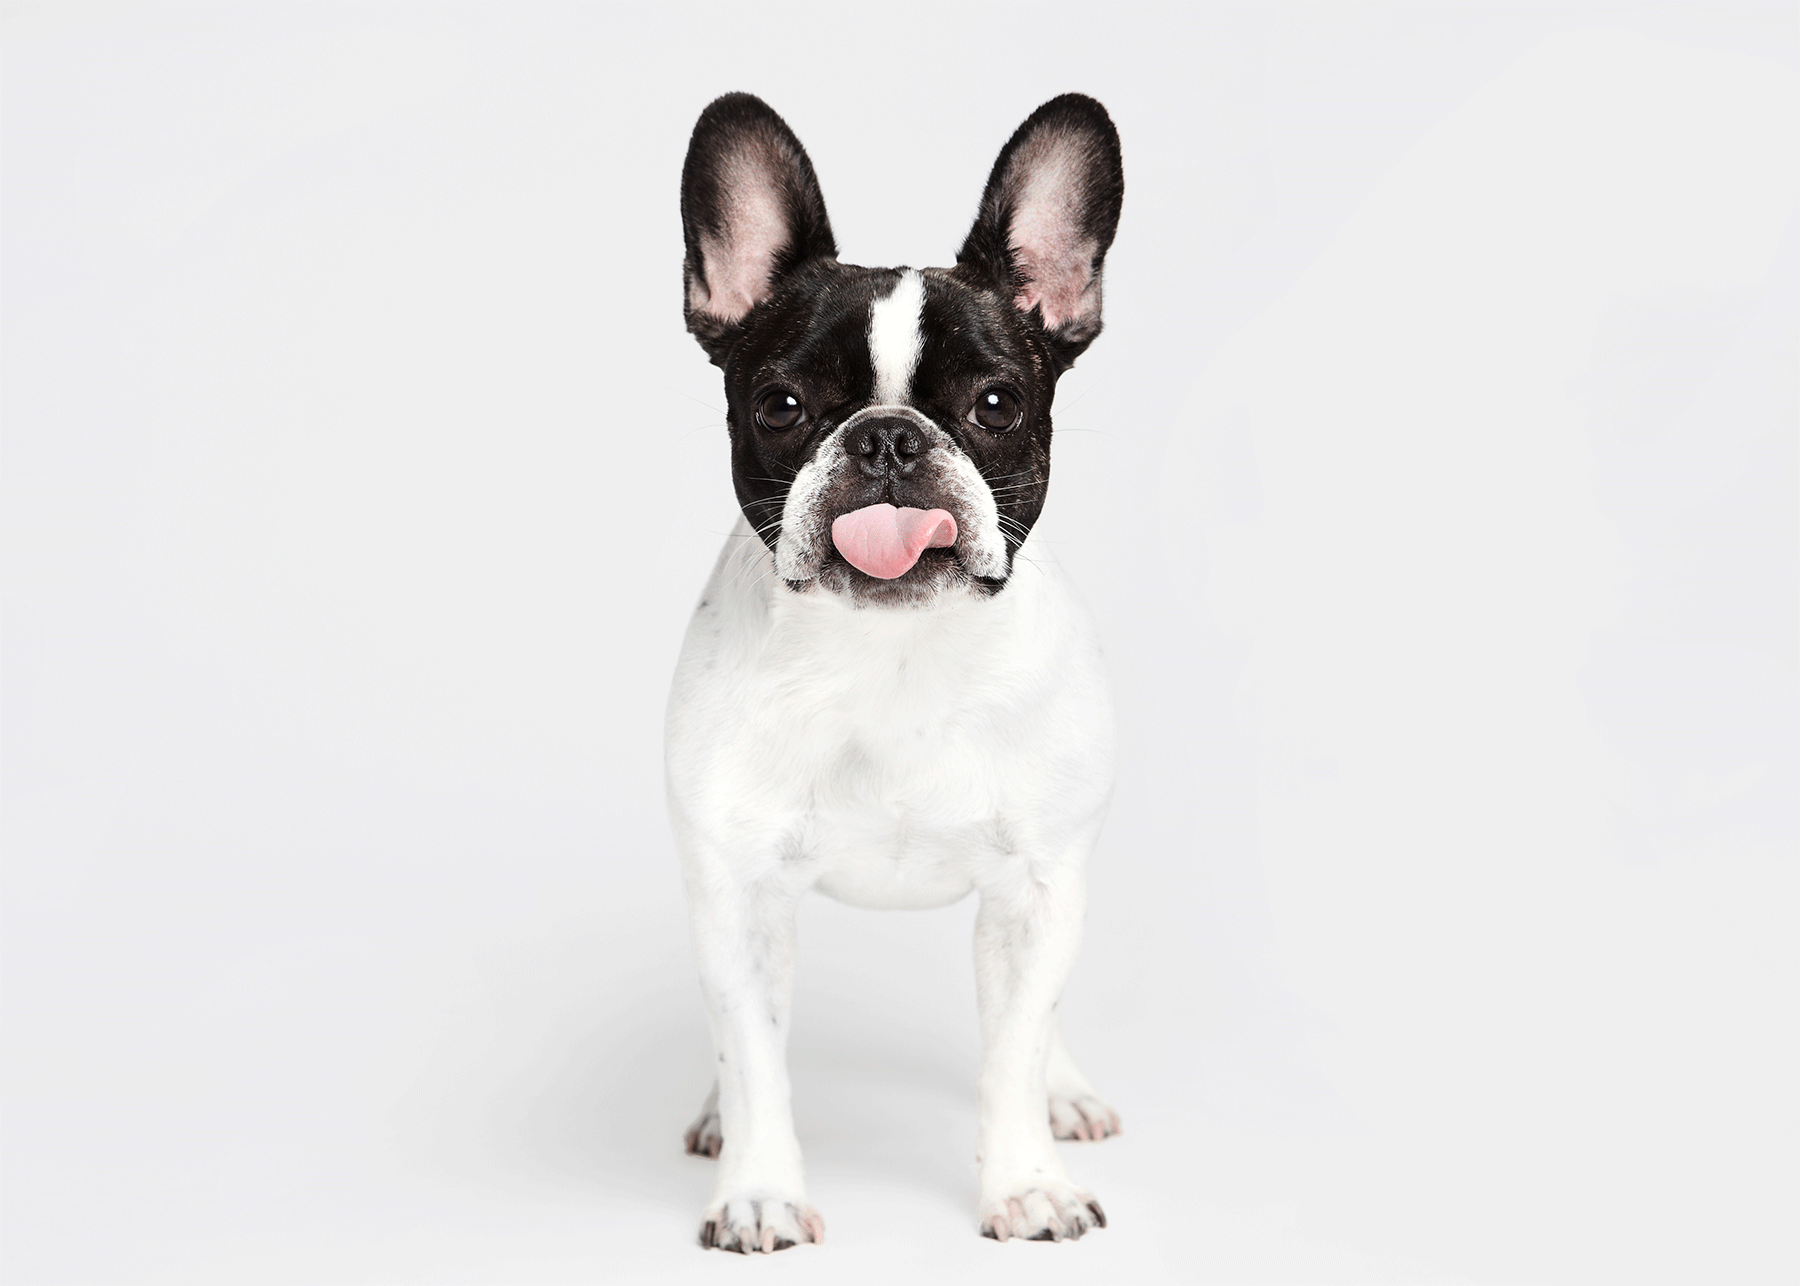 Boston terrier sticking tongue out